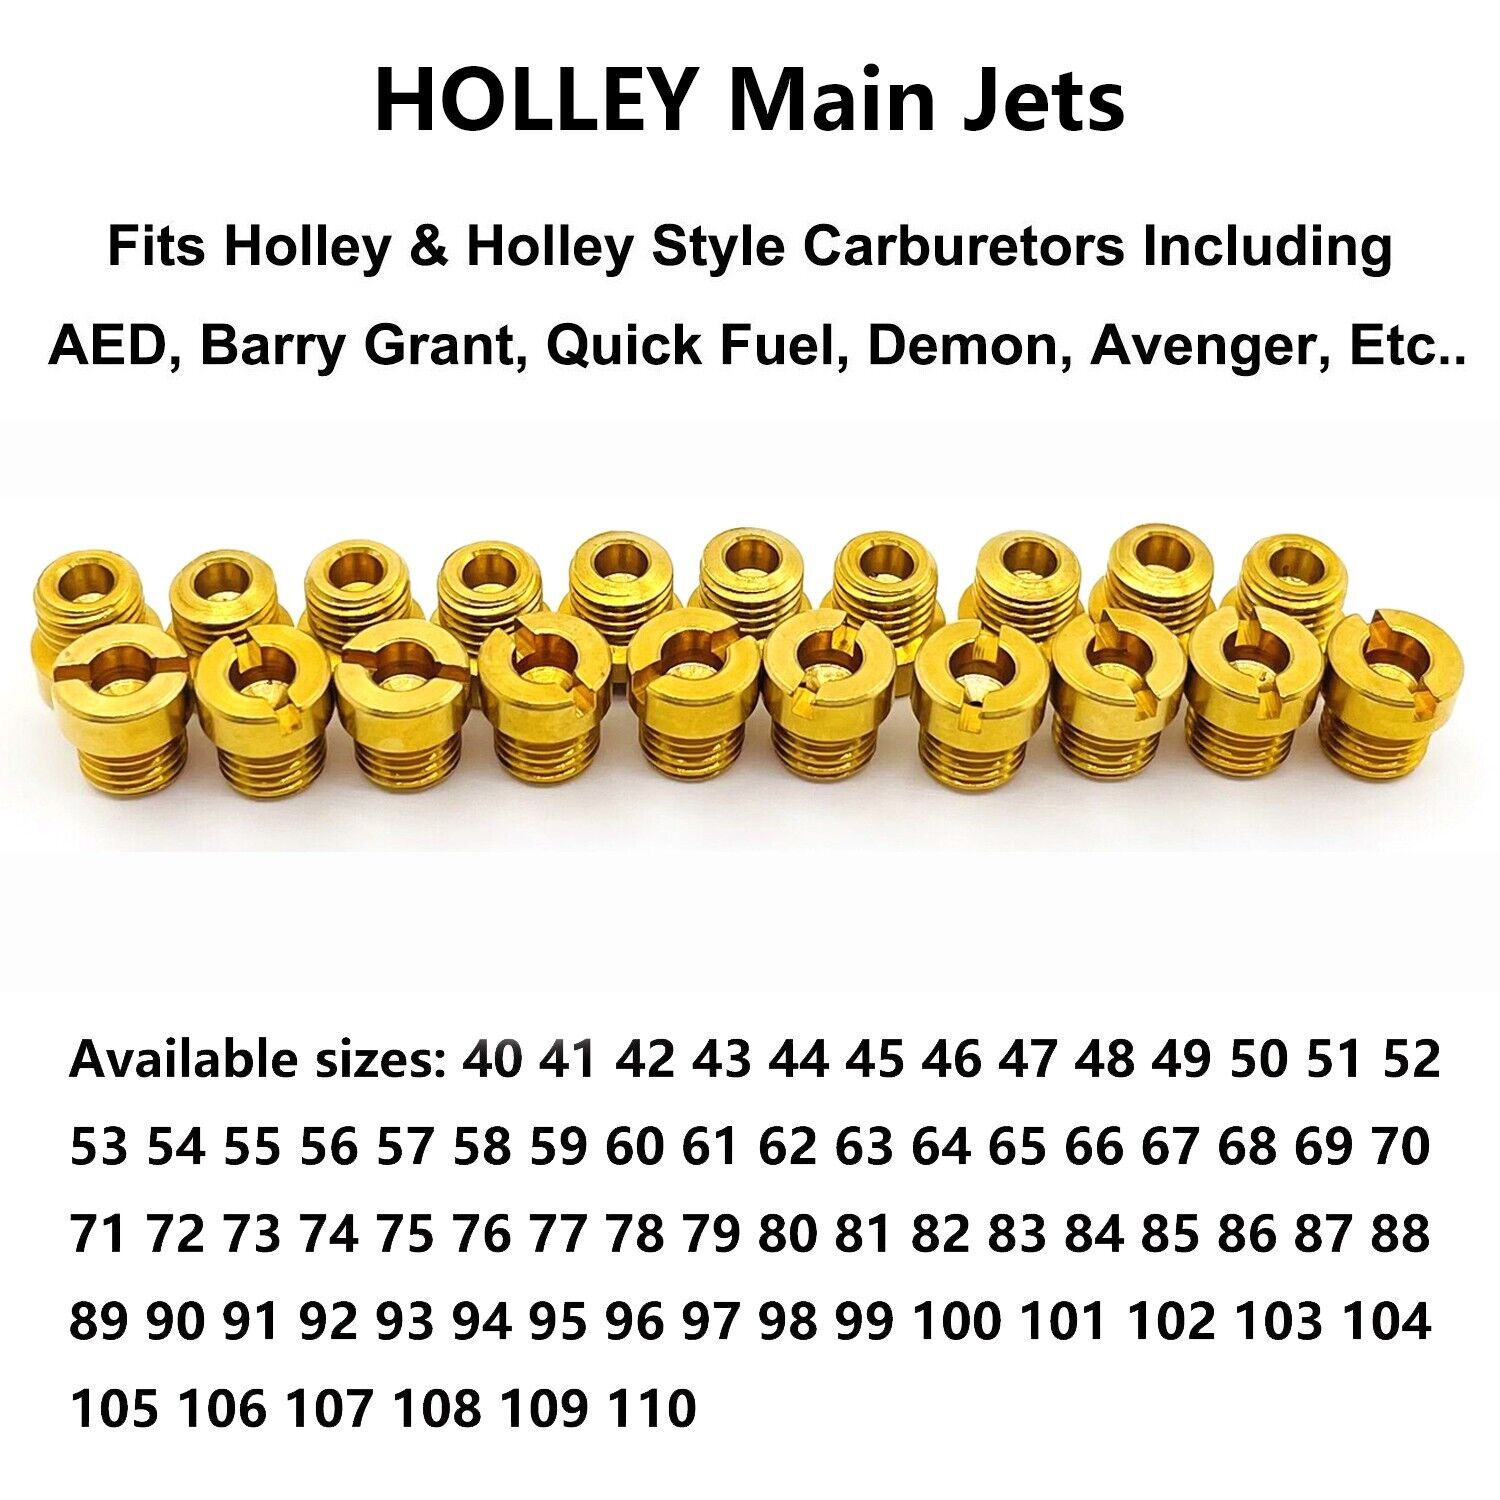 20 PACK Holley Carb Carburetor GAS MAIN JETS KIT 40-110 1/4-32 YOU PICK ANY SIZE